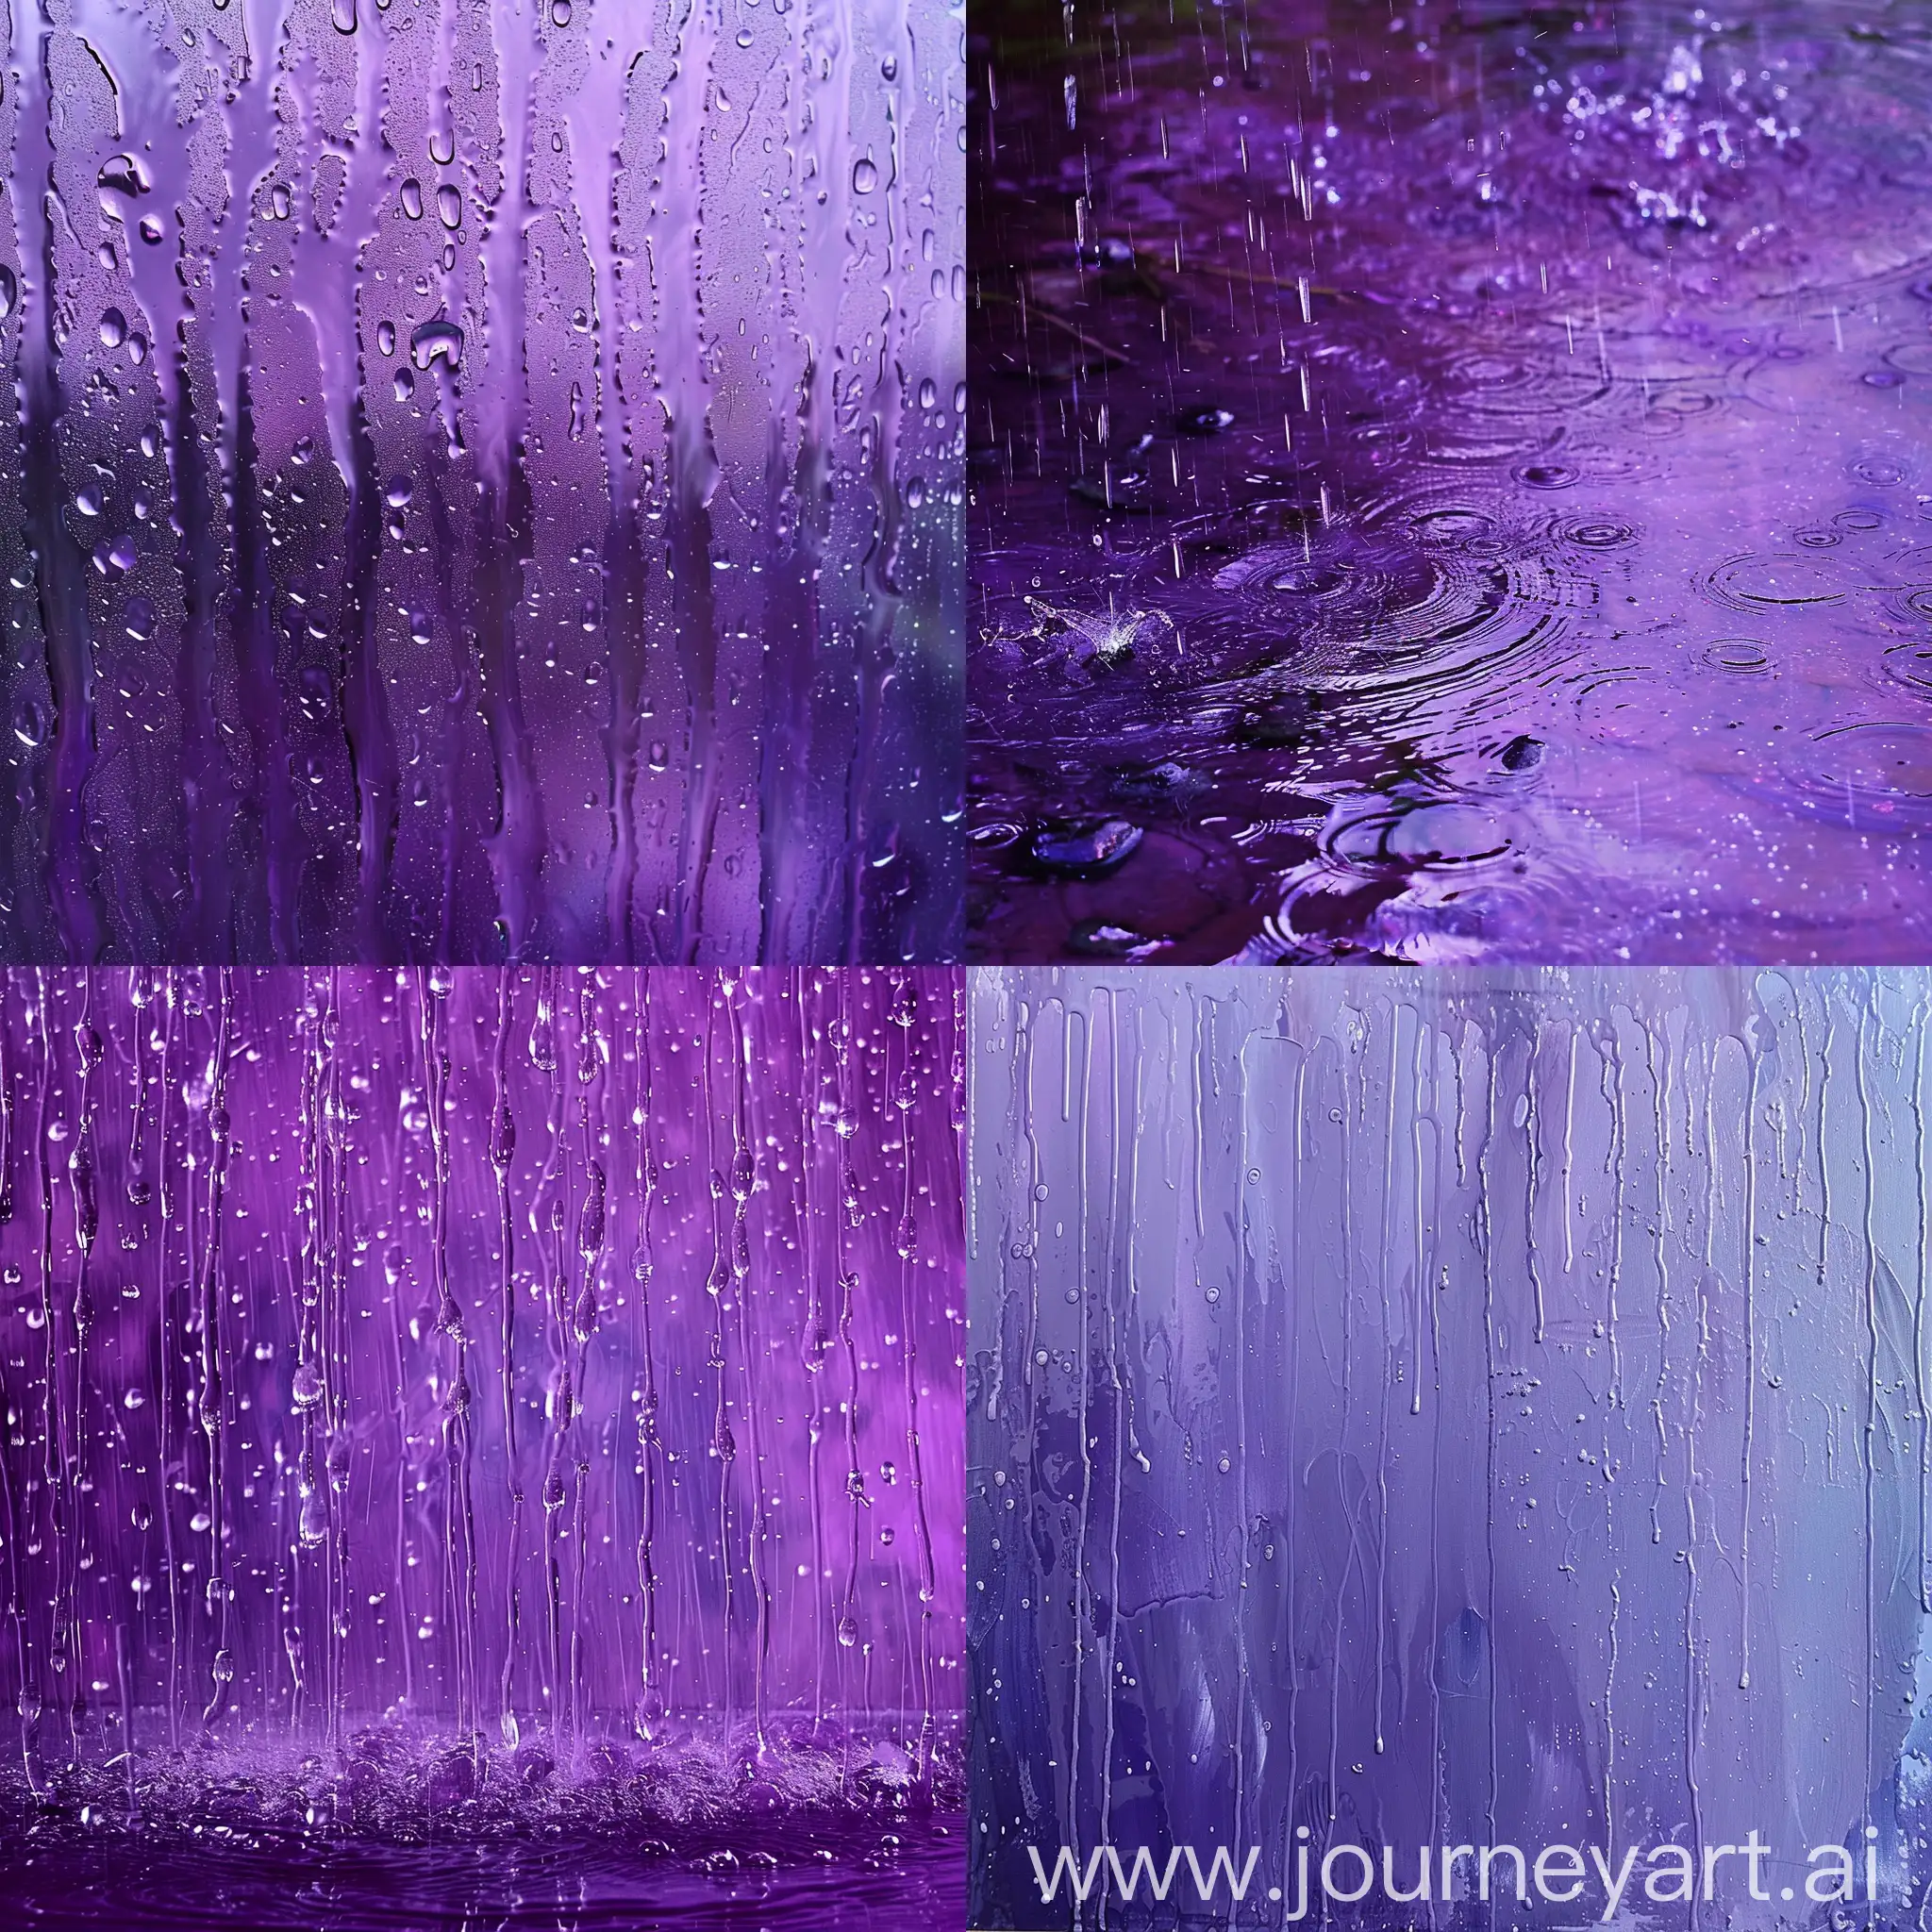 Purple-Rain-Formation-Abstract-Art-with-Vibrant-Colors